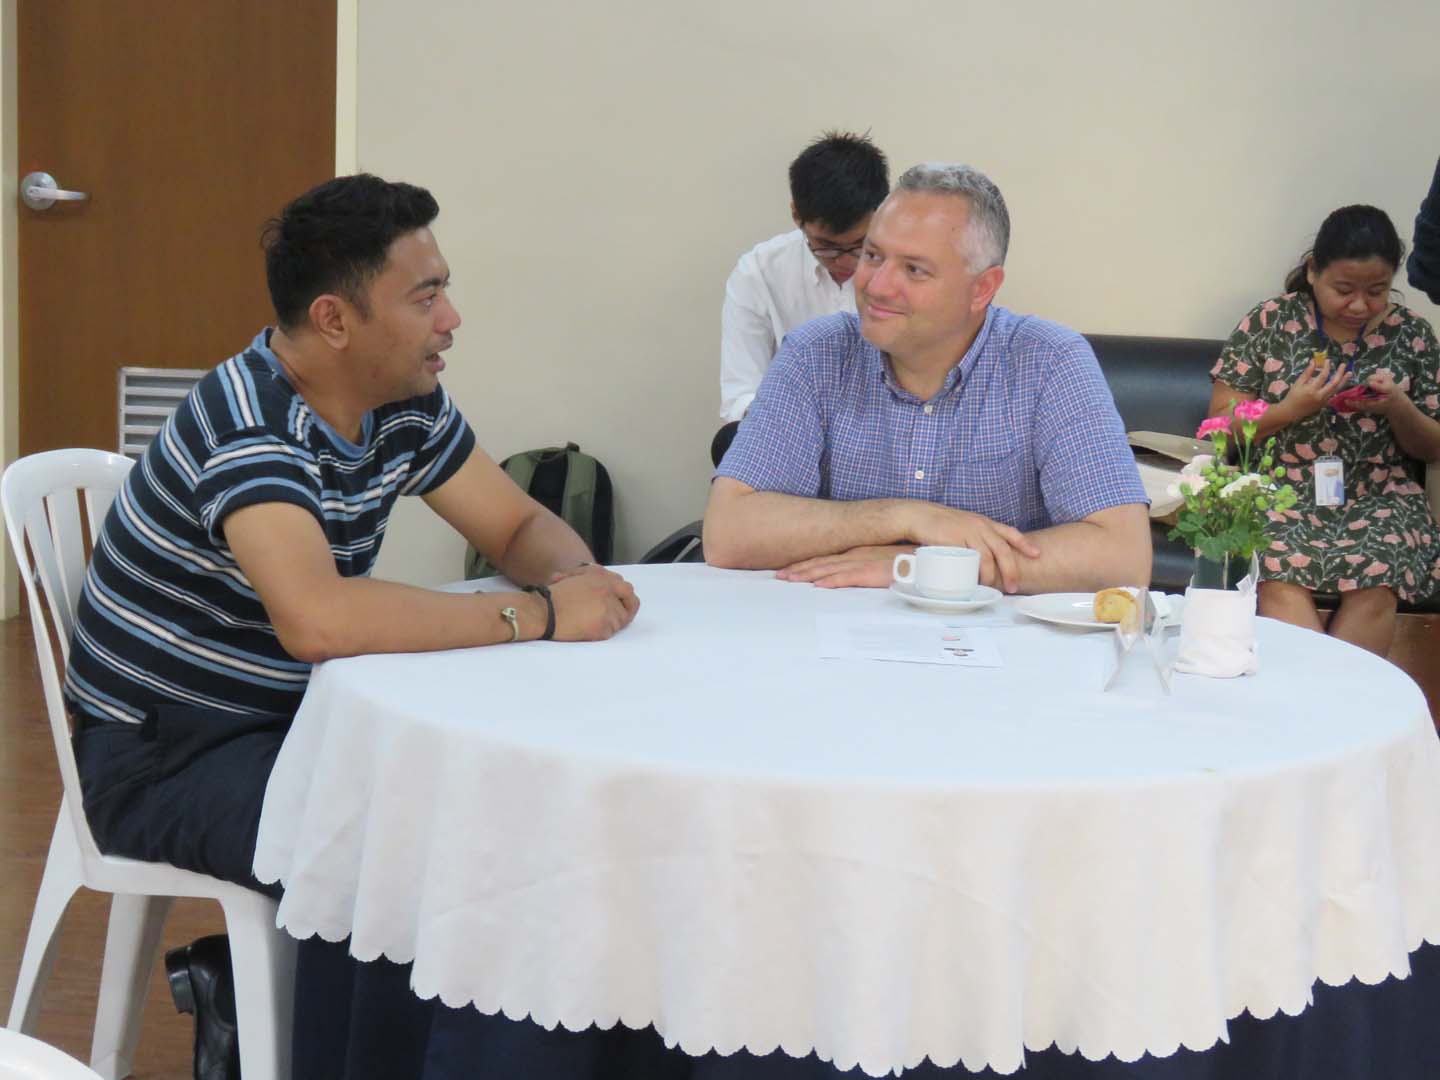 Participants during the one-on-one mentoring sessions